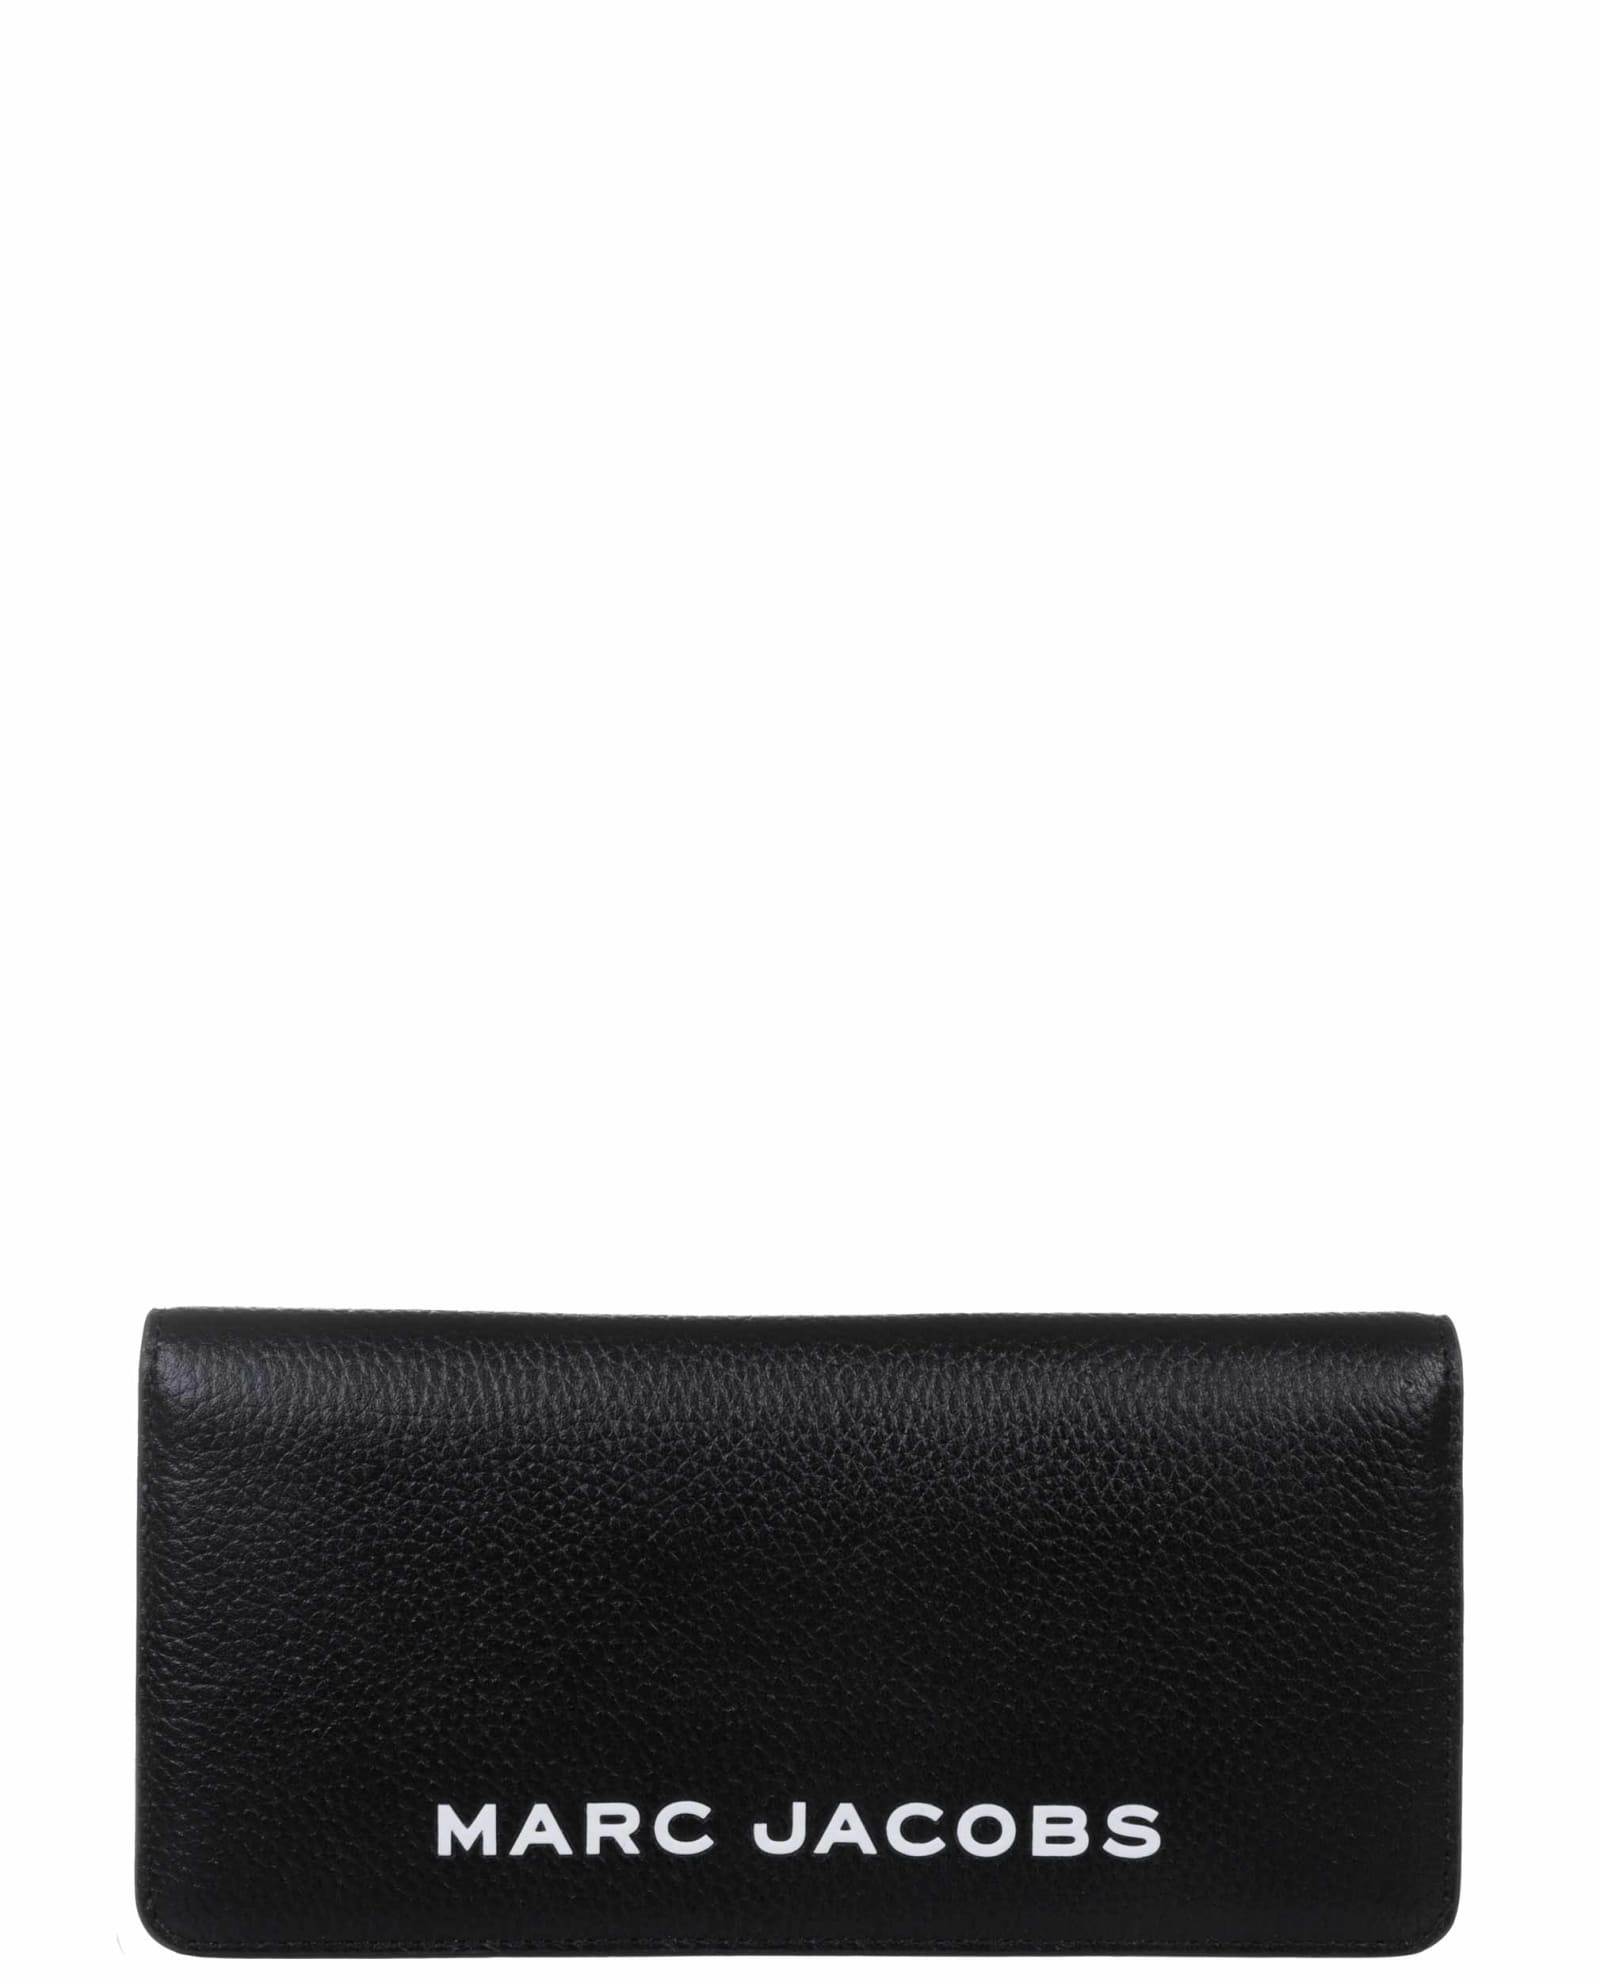 The Marc Jacobs Black Wallet